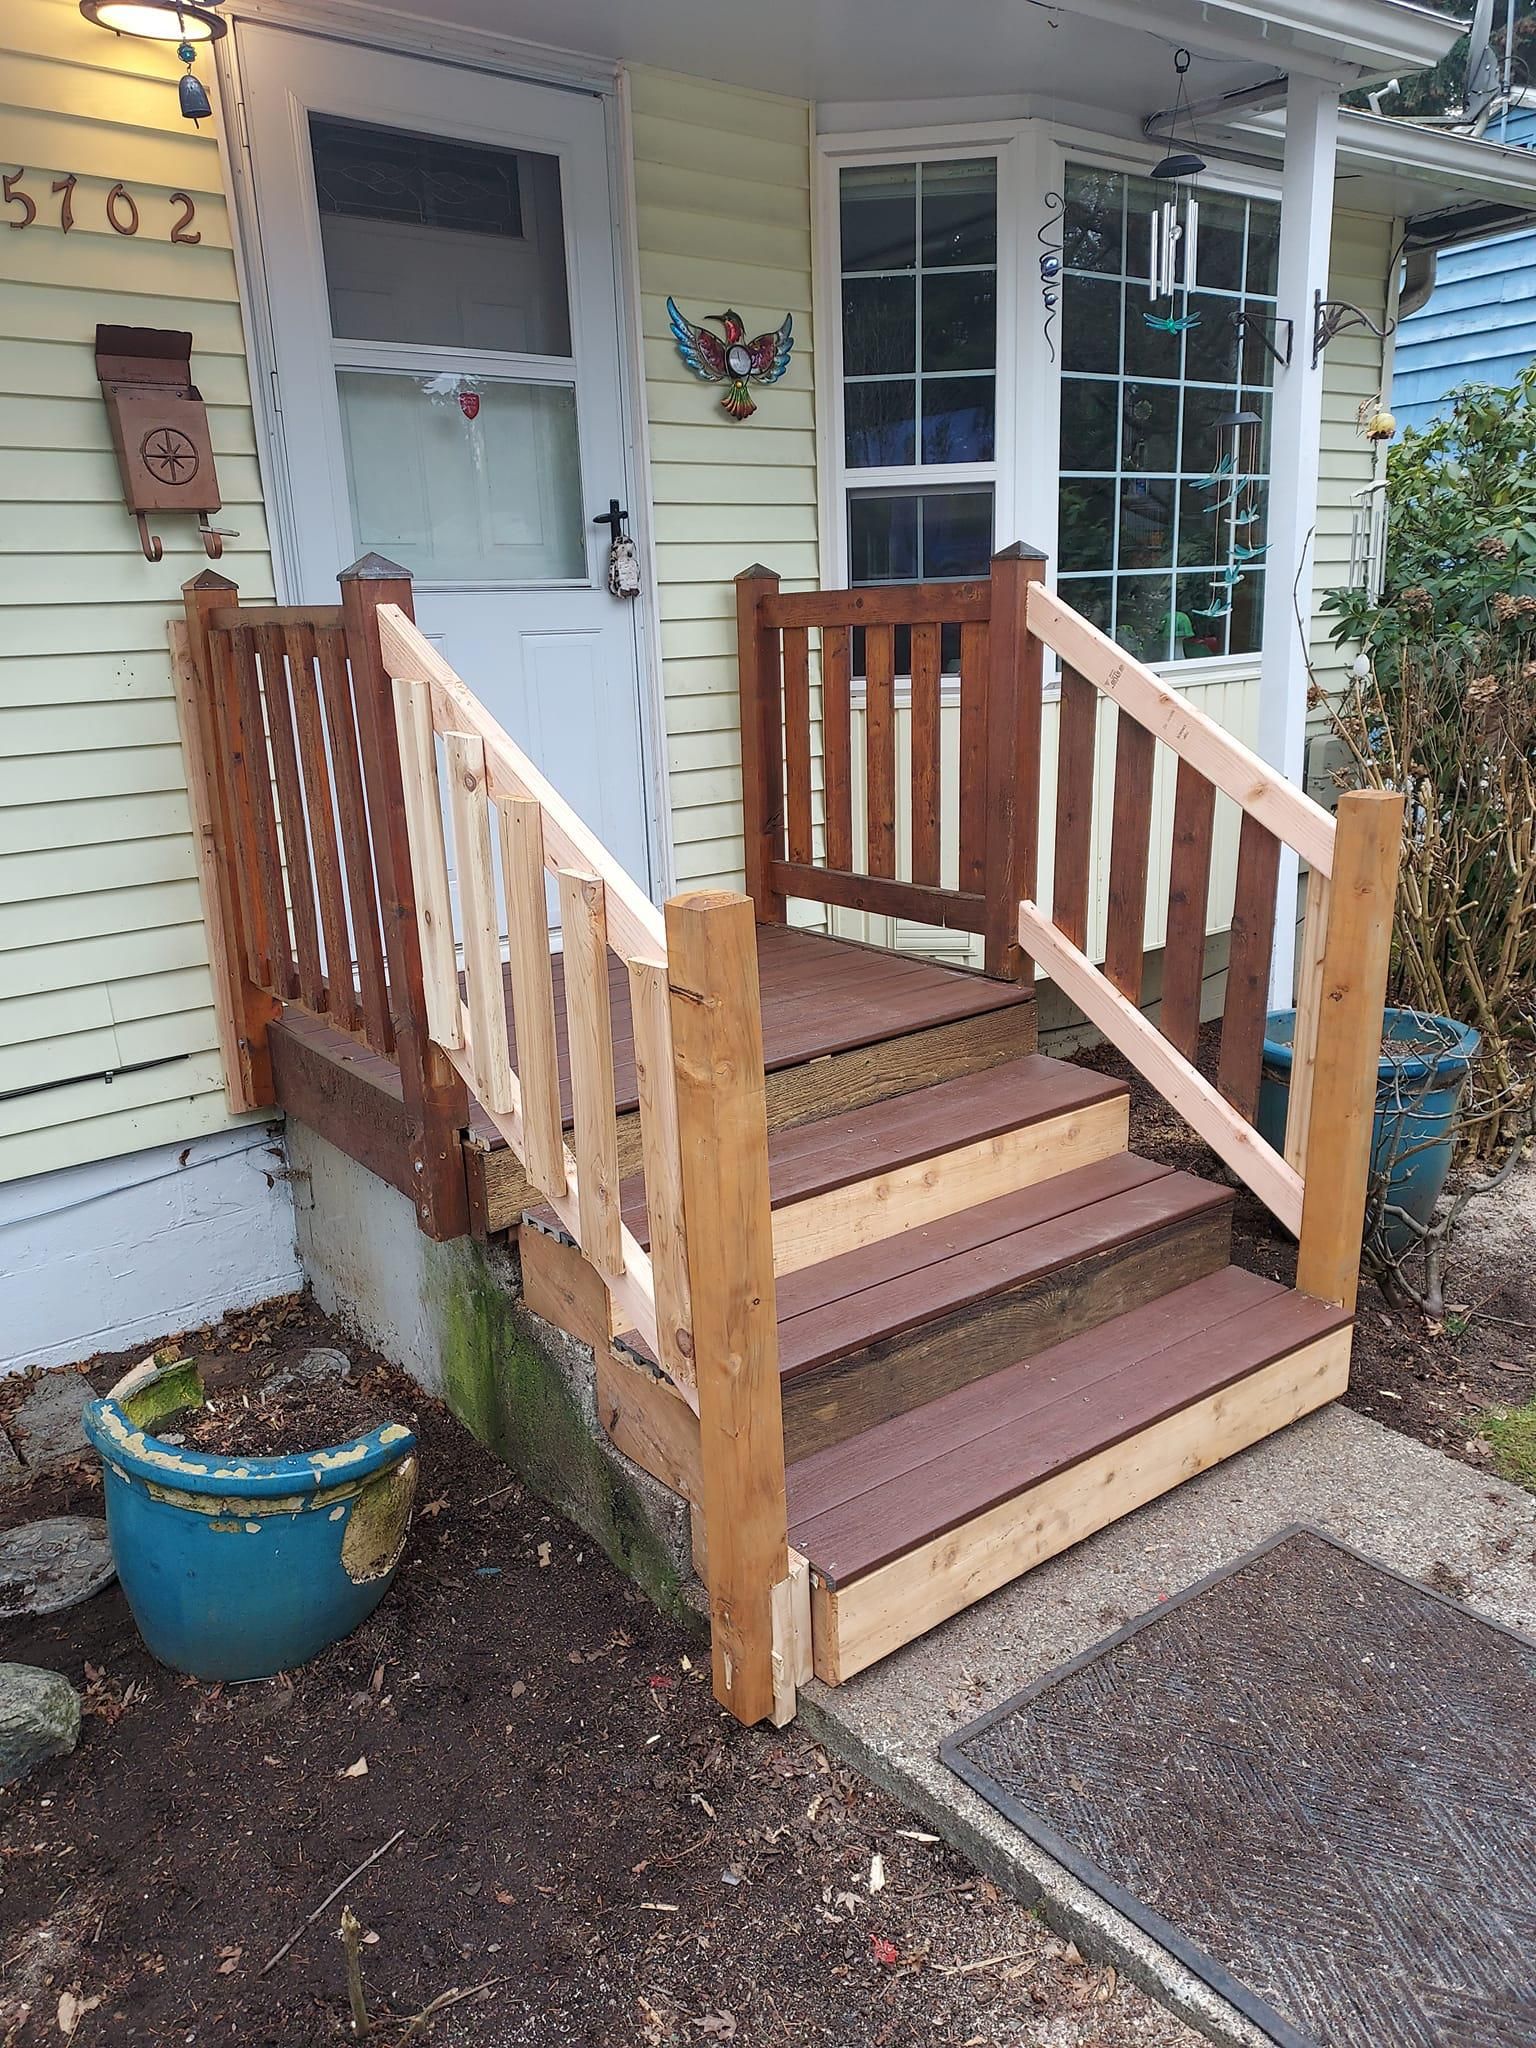 Door-Fence Installation for Perben Painting and Landscape LLC in Mount Vernon, WA